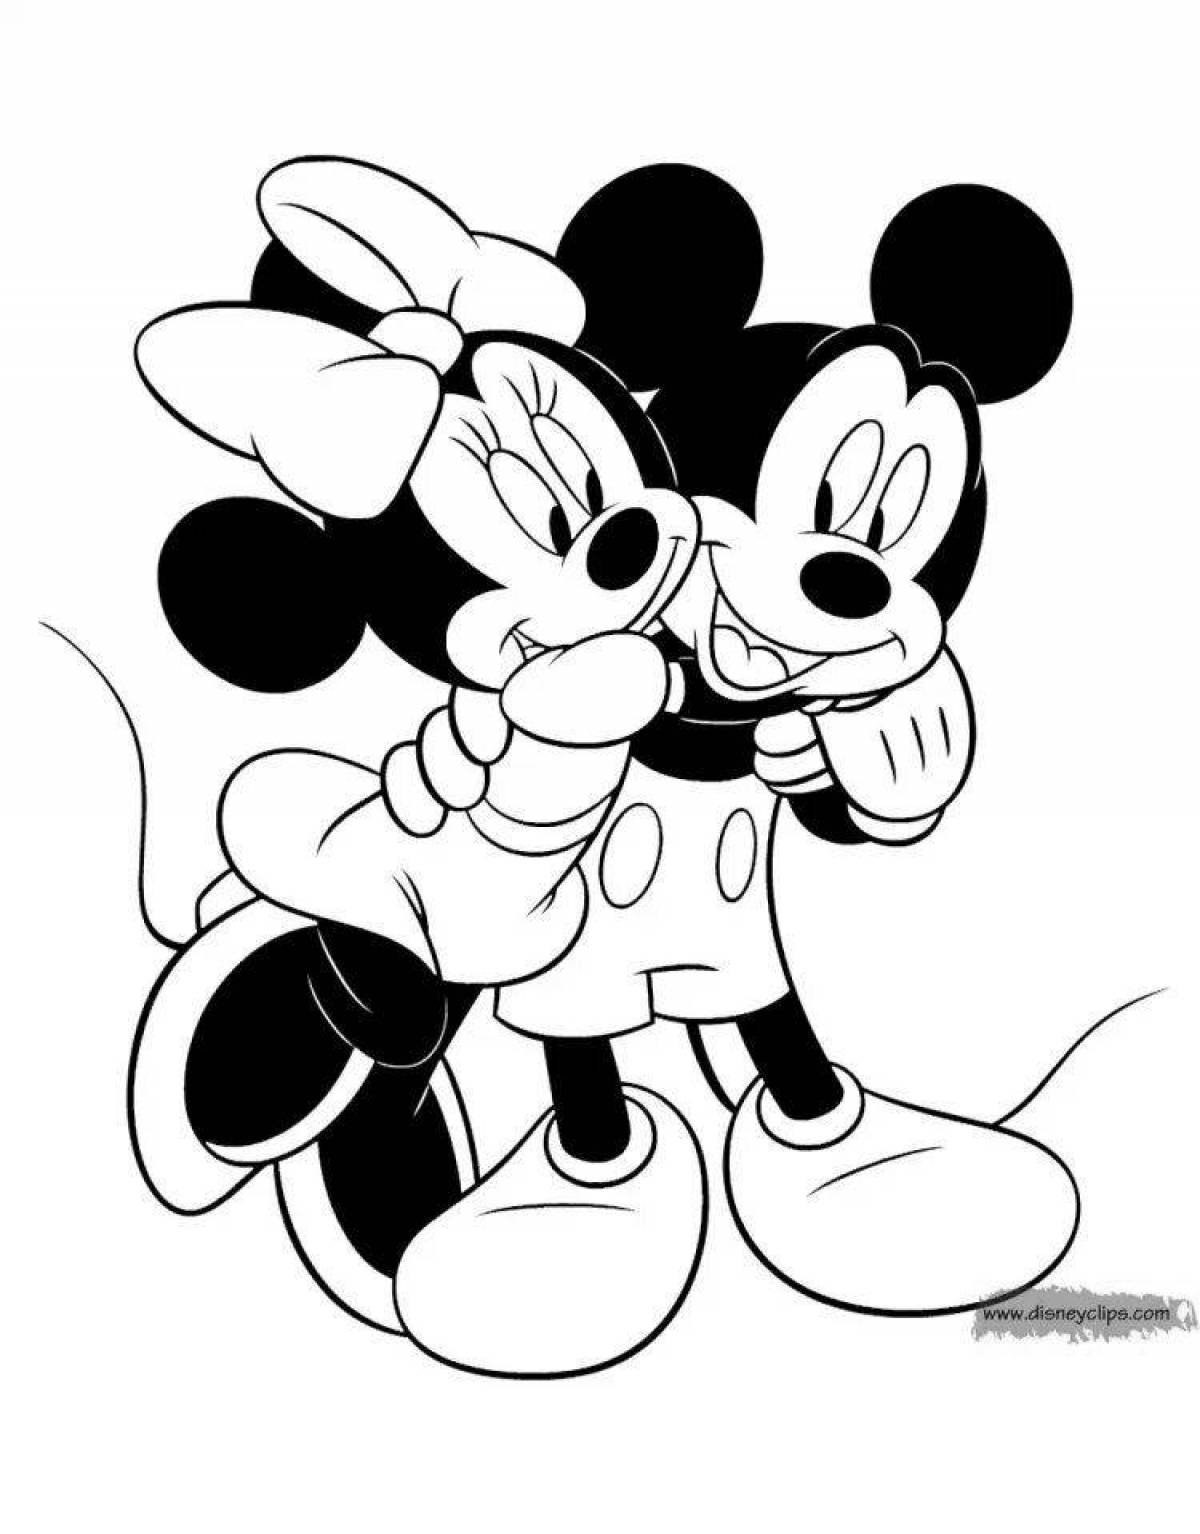 Mickey Mouse and Minnie Mouse #3